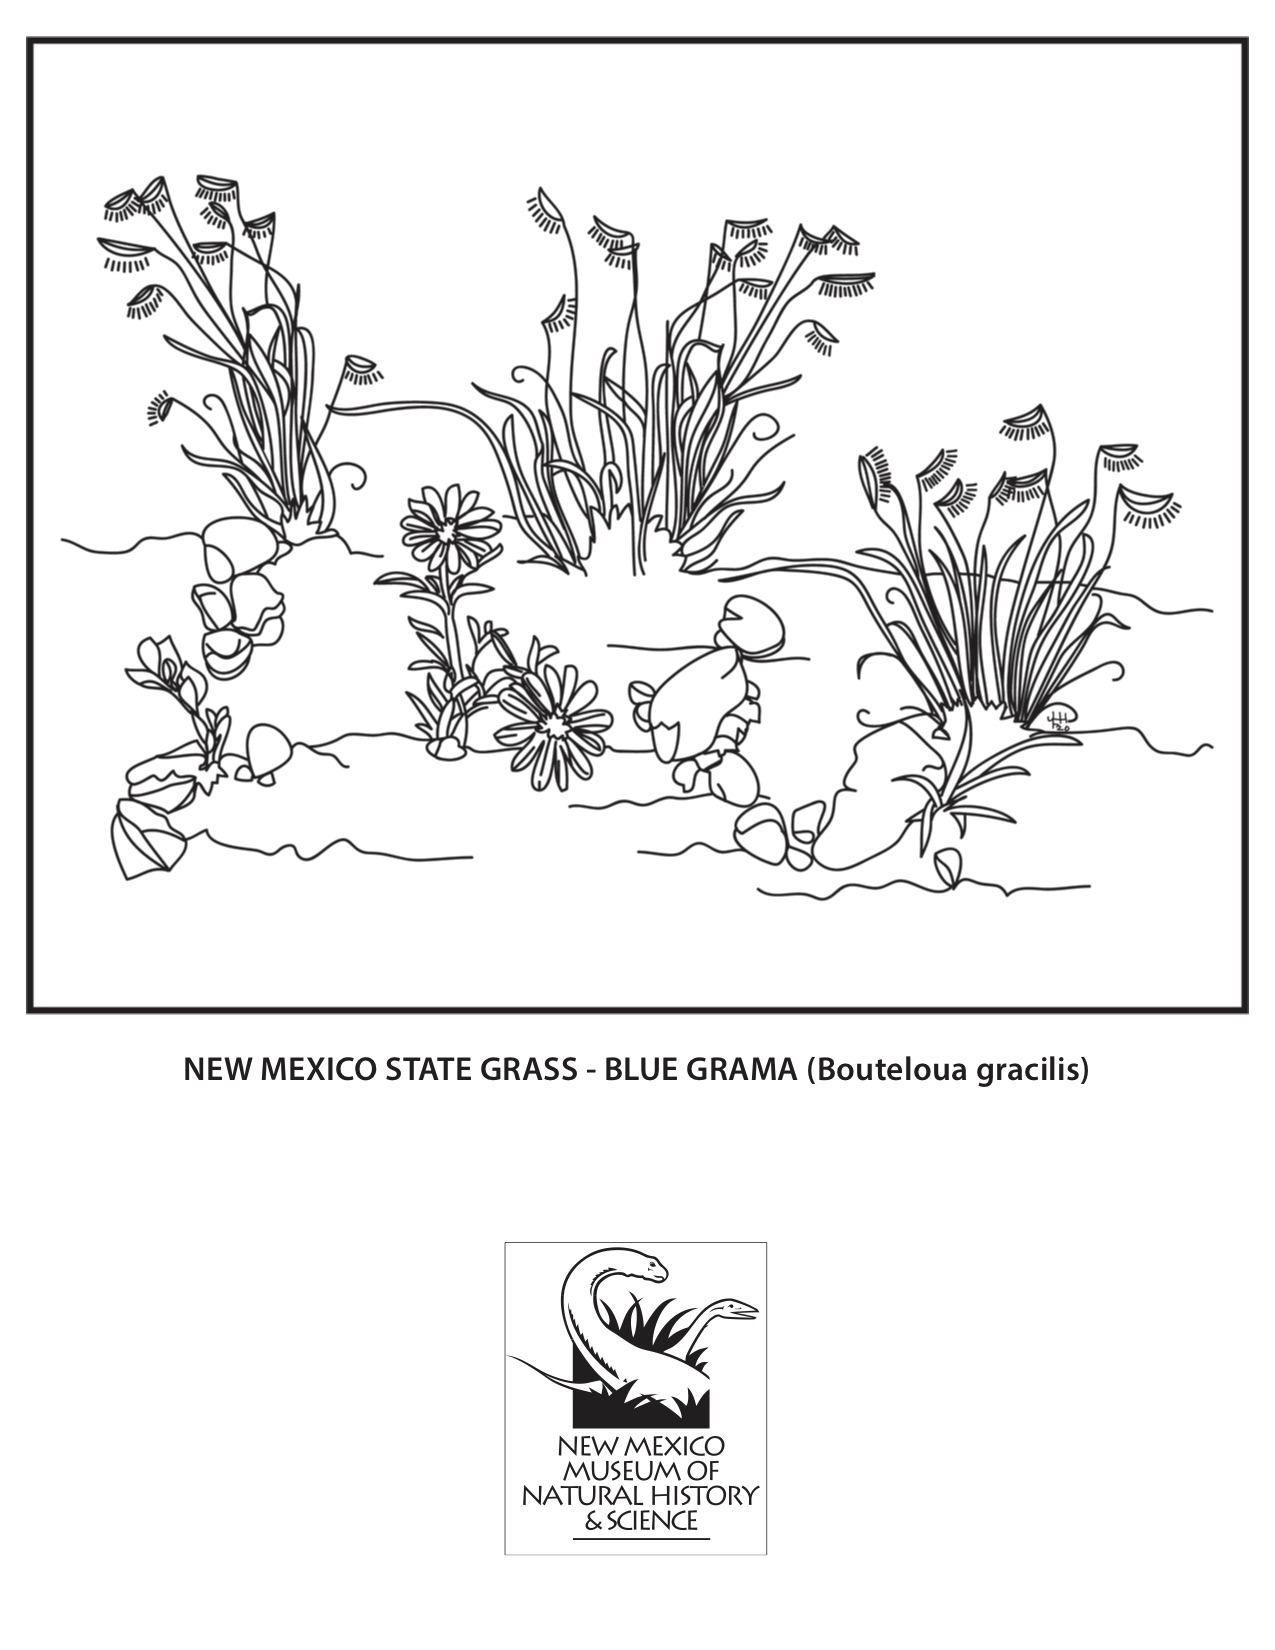 Grass Coloring Page